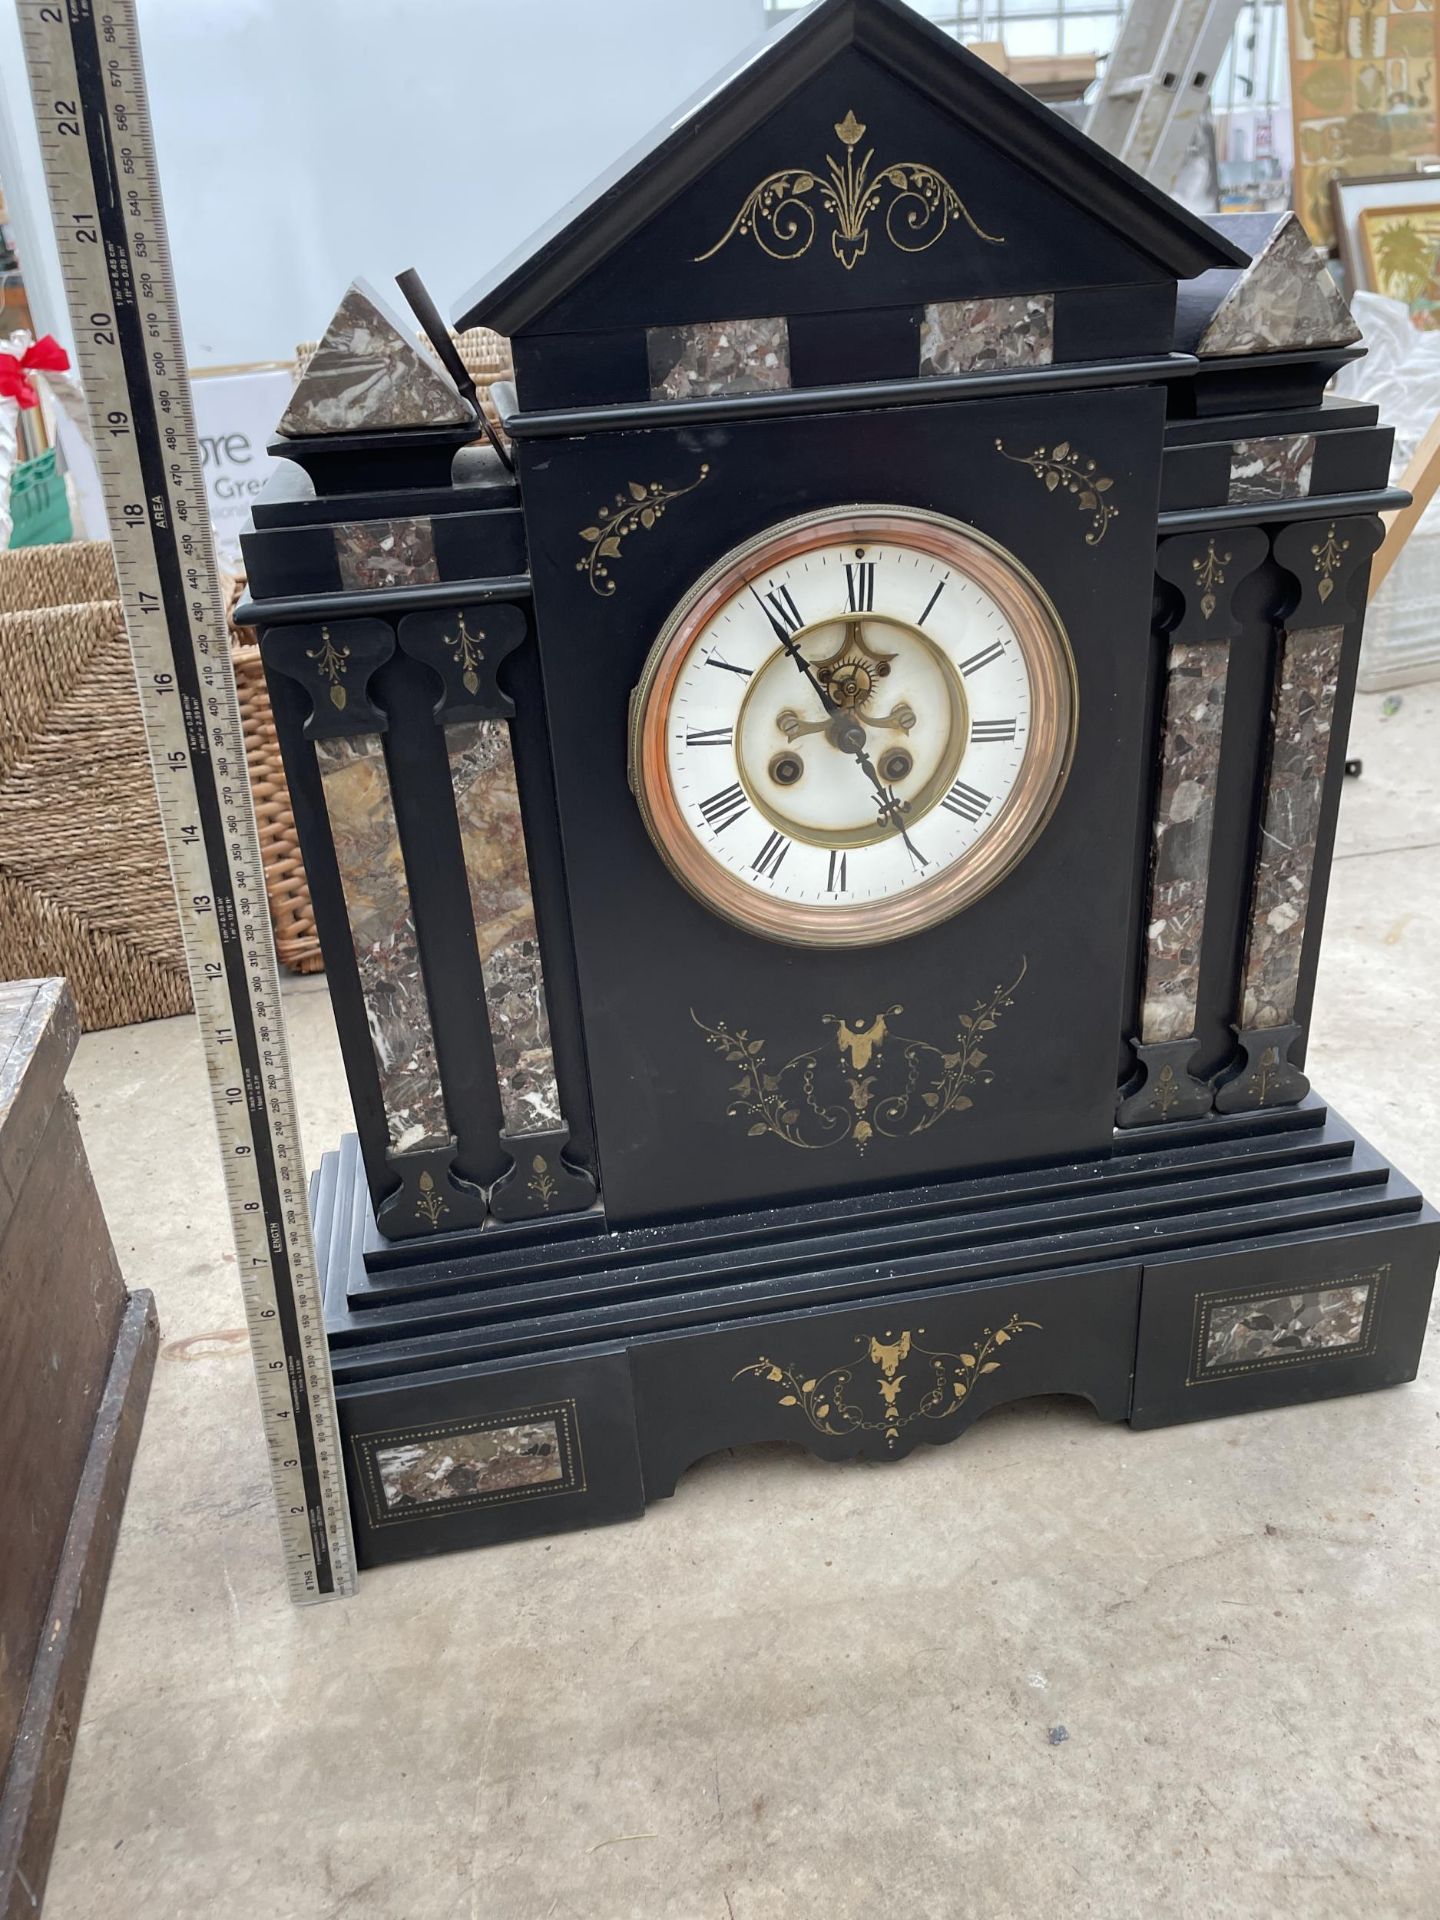 A LARGE HEAVY SLATE MANTLE CLOCK WITH WINDING KEY - Image 2 of 6